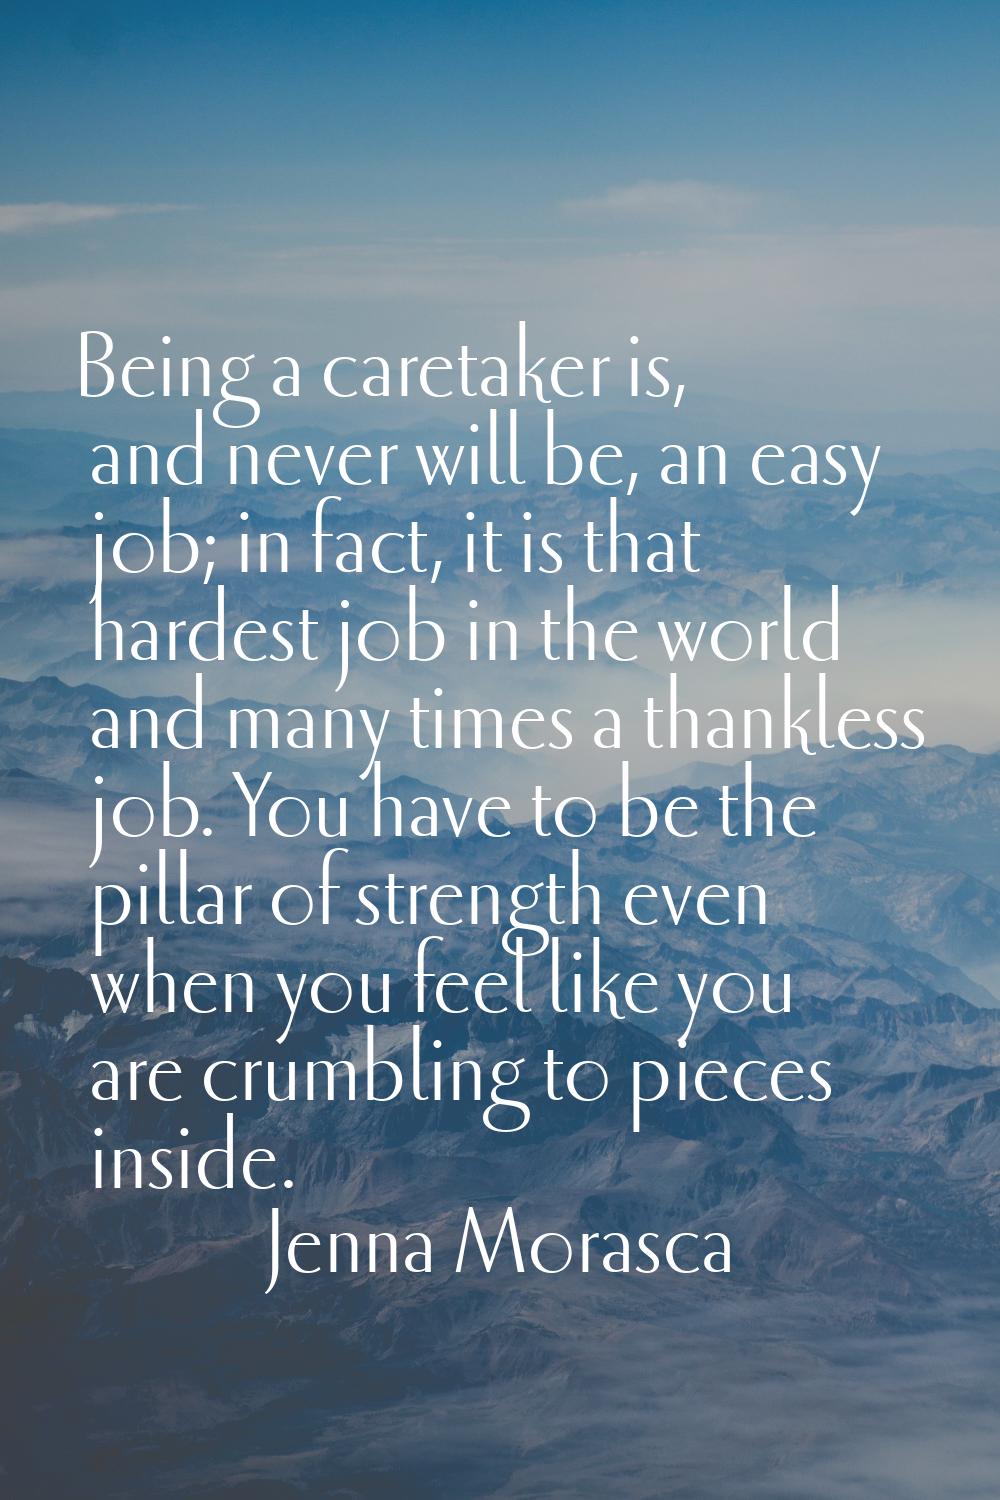 Being a caretaker is, and never will be, an easy job; in fact, it is that hardest job in the world 